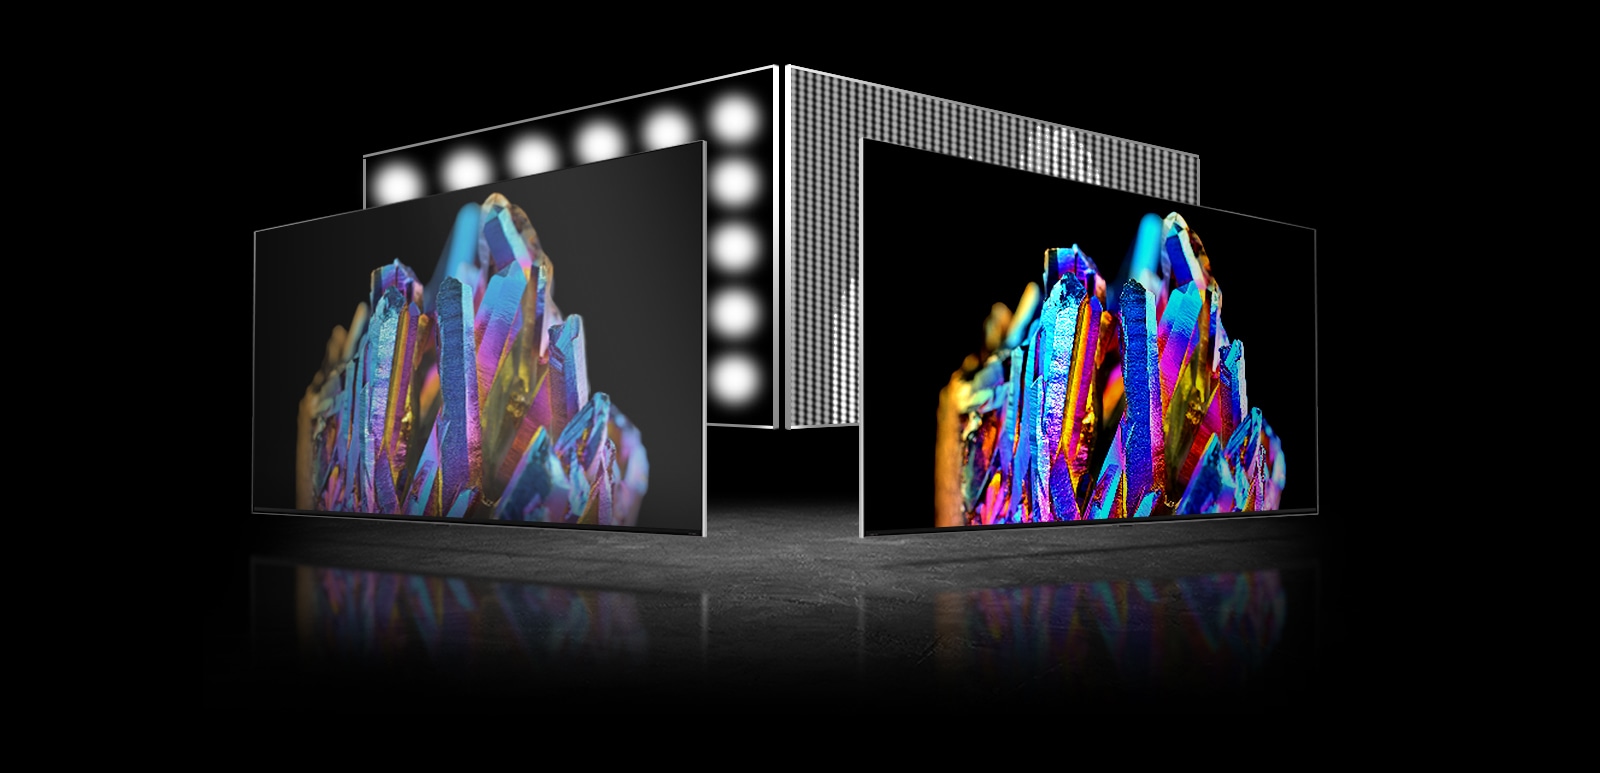 There are two TV screens – one on left another on right. There are same images of a colorful crystal on each TV. An image on left is a bit pale while an image on right is very vivid. There is a processor chip image on left bottom corner of a TV on right image.